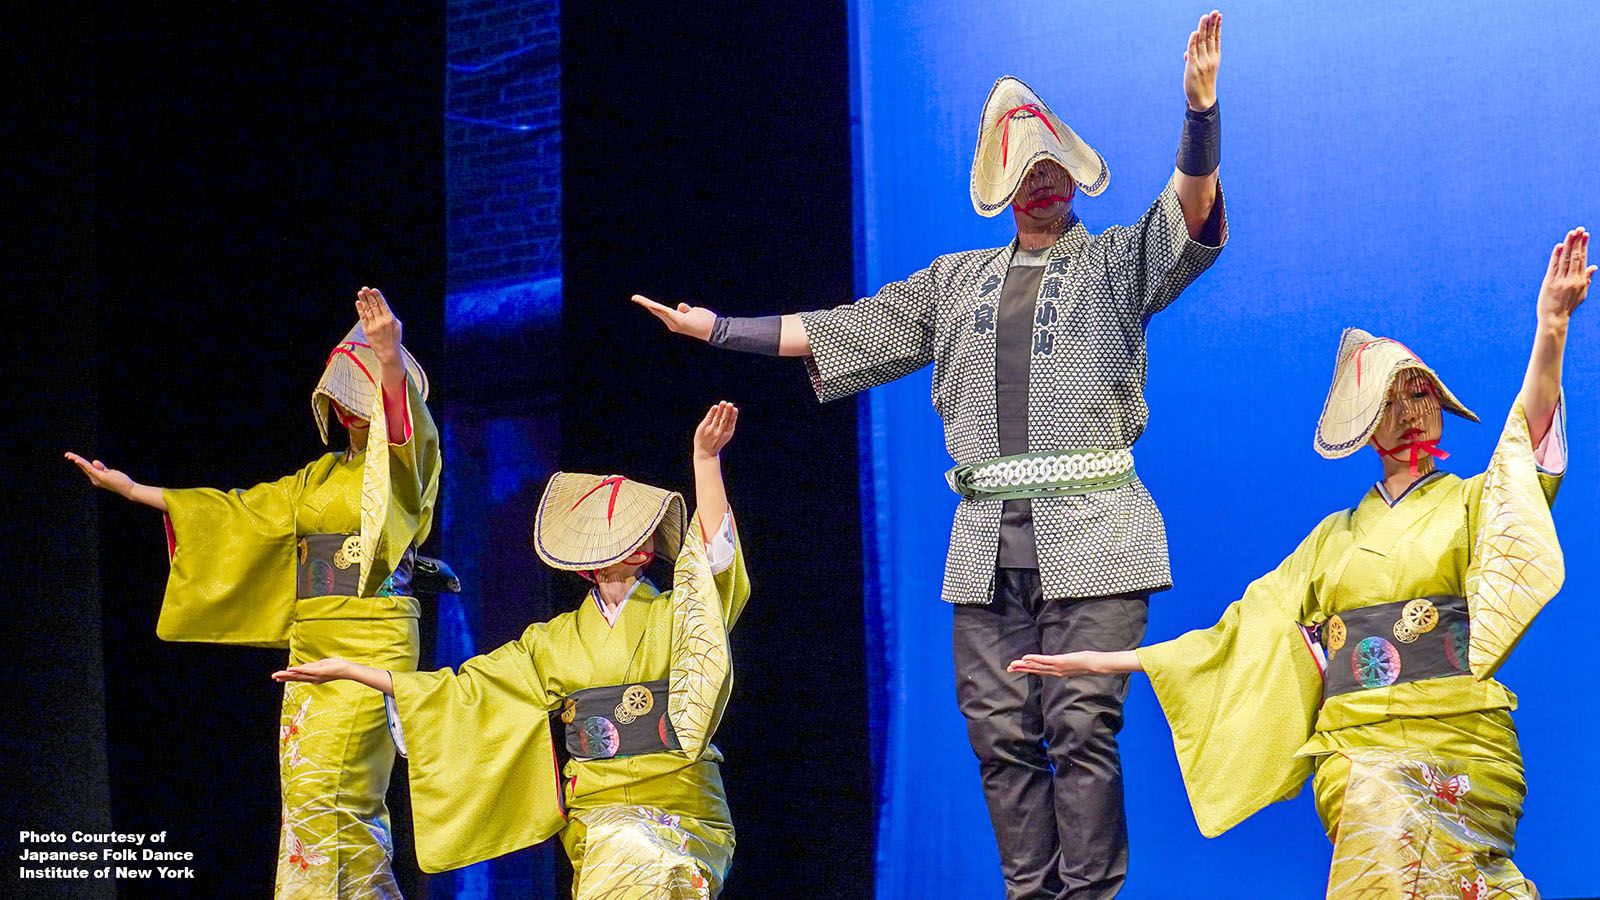 Members of Japanese Folk Dance Institute of New York will take part in this year’s Fort Wayne Dance Collective Halloween Show, Shino Shadows.